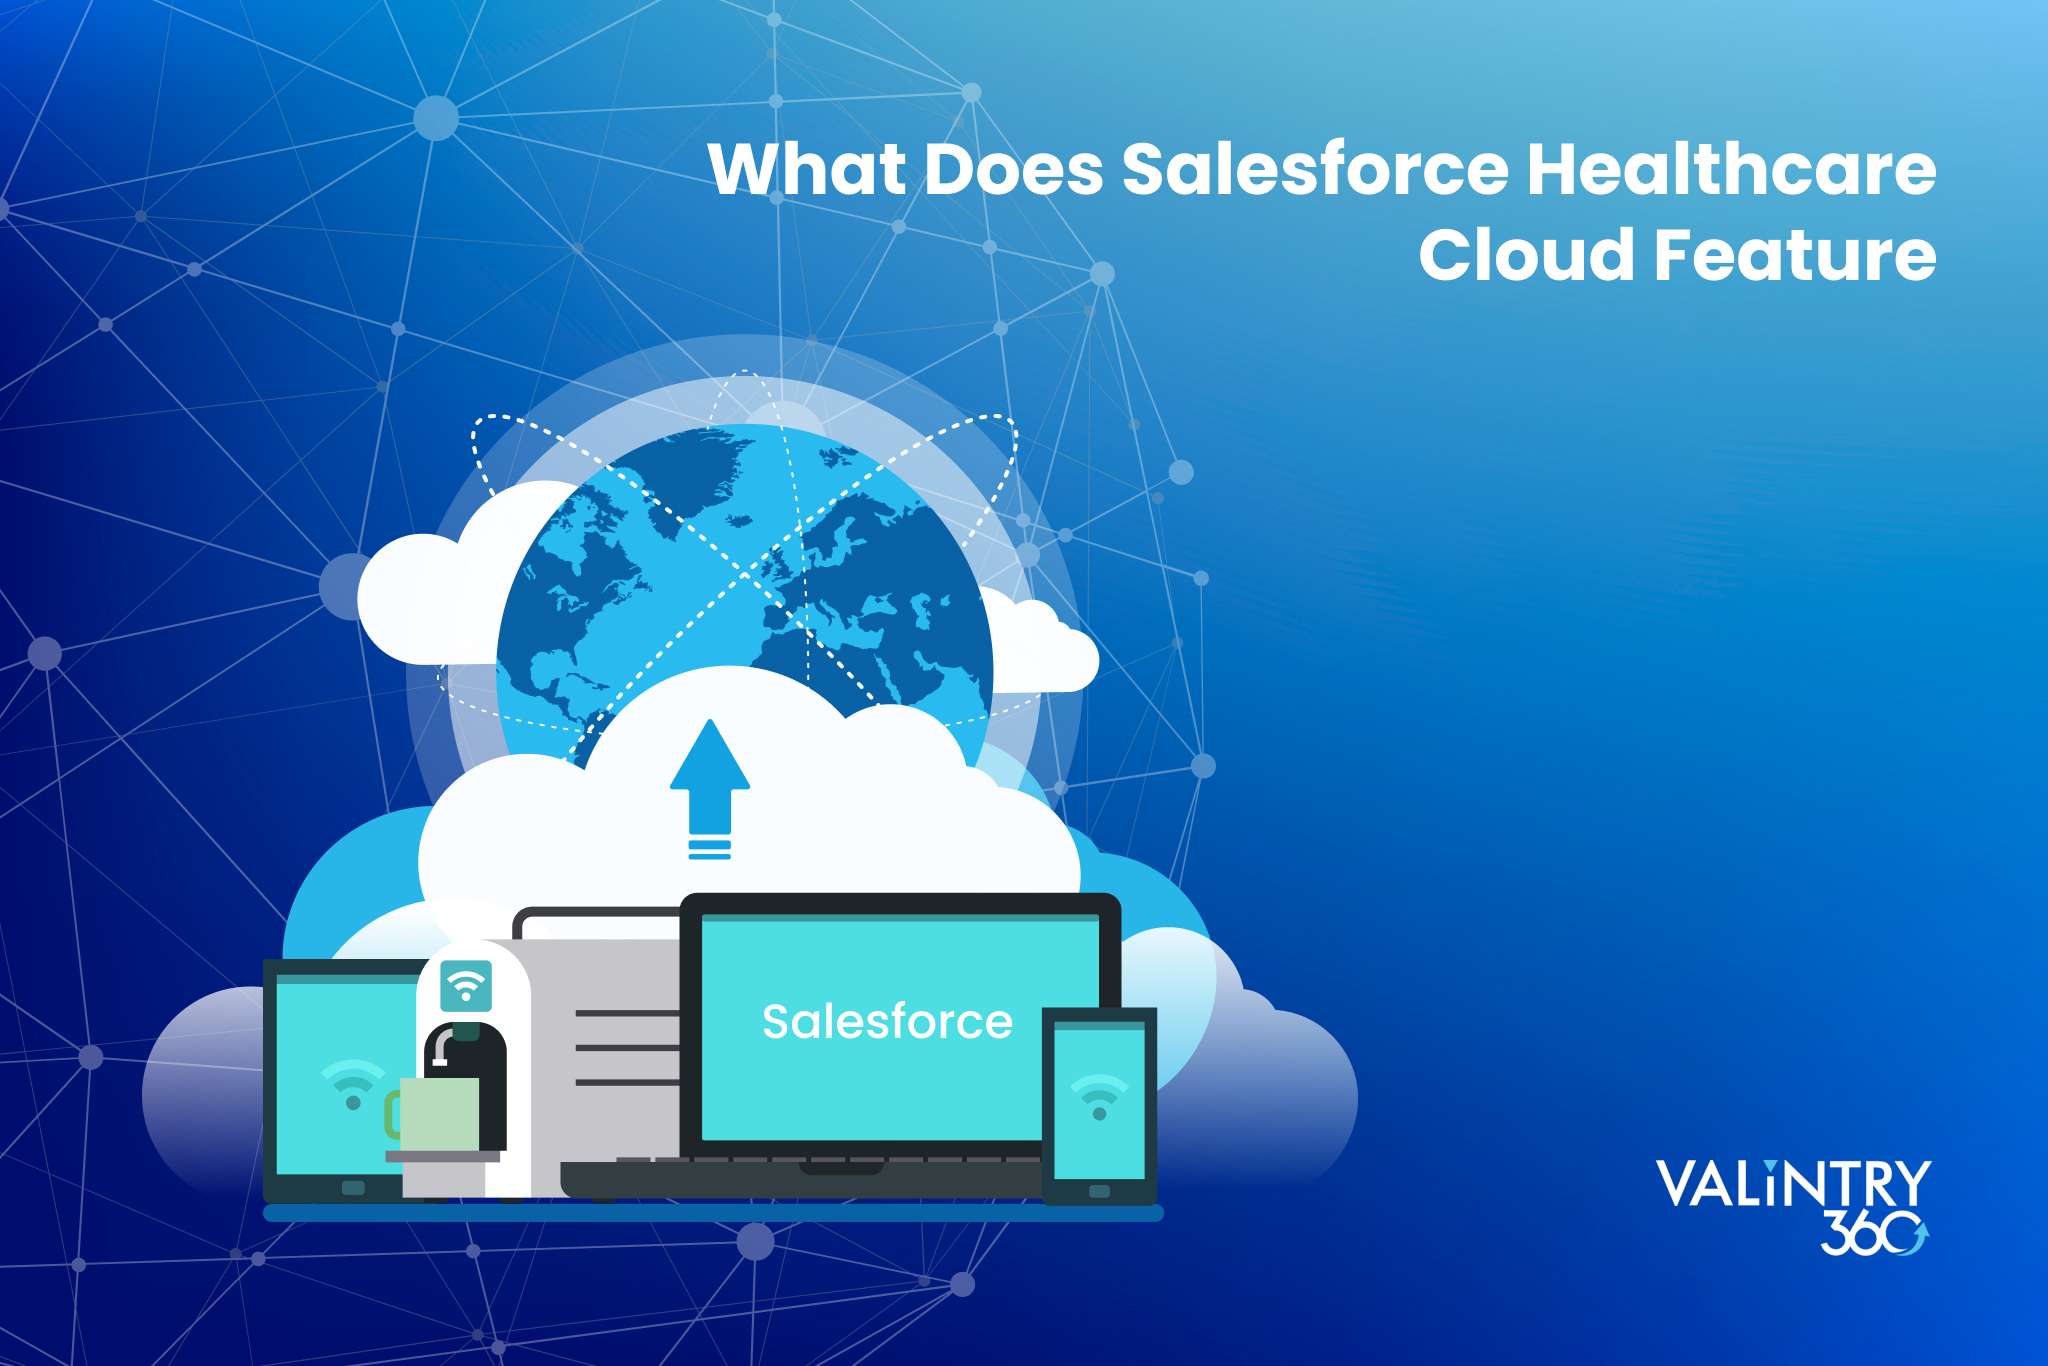 What Does the Salesforce Healthcare Cloud Feature?